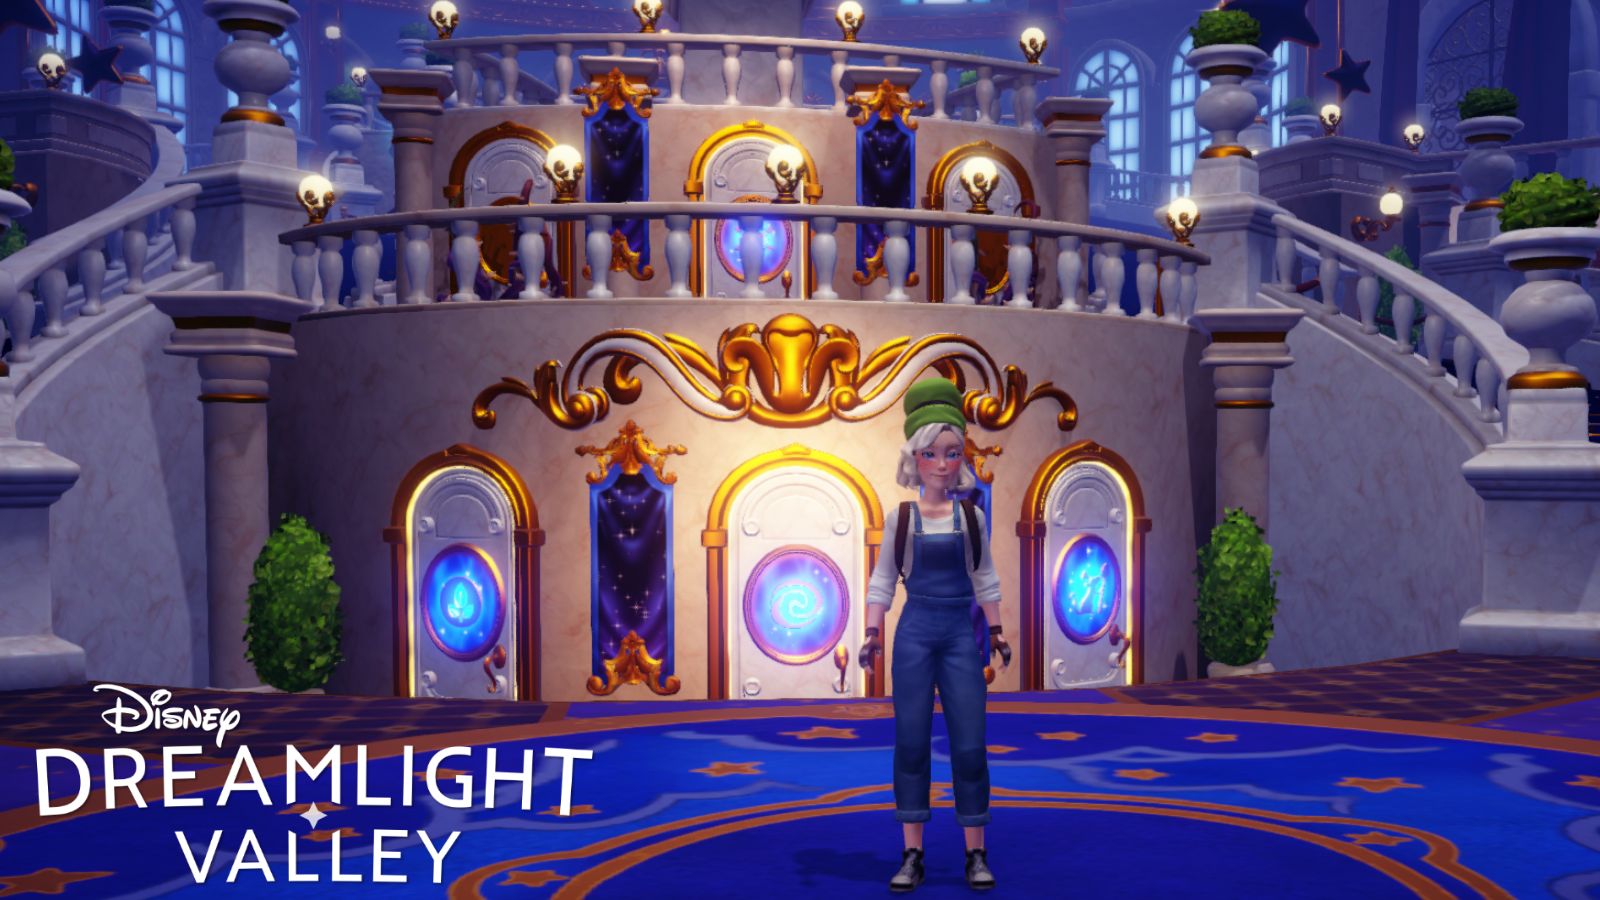 Disney Dreamlight Valley's Plot Is Basically the Show Once Upon a Time